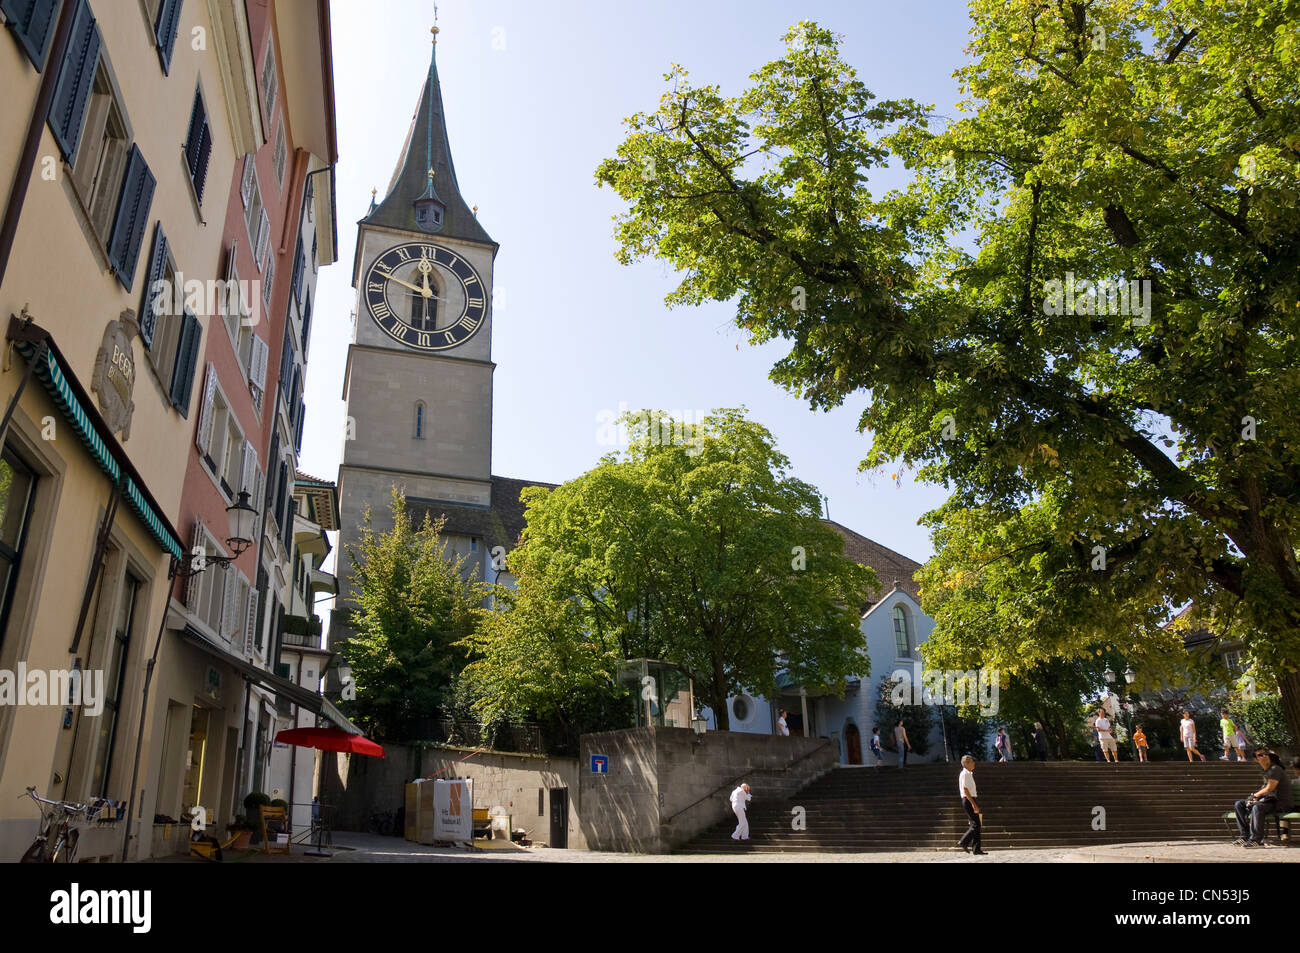 Horizontal wide angle of St Peter kirche, St Peter's church on Lindenhof hill in Zurich on a sunny day. Stock Photo